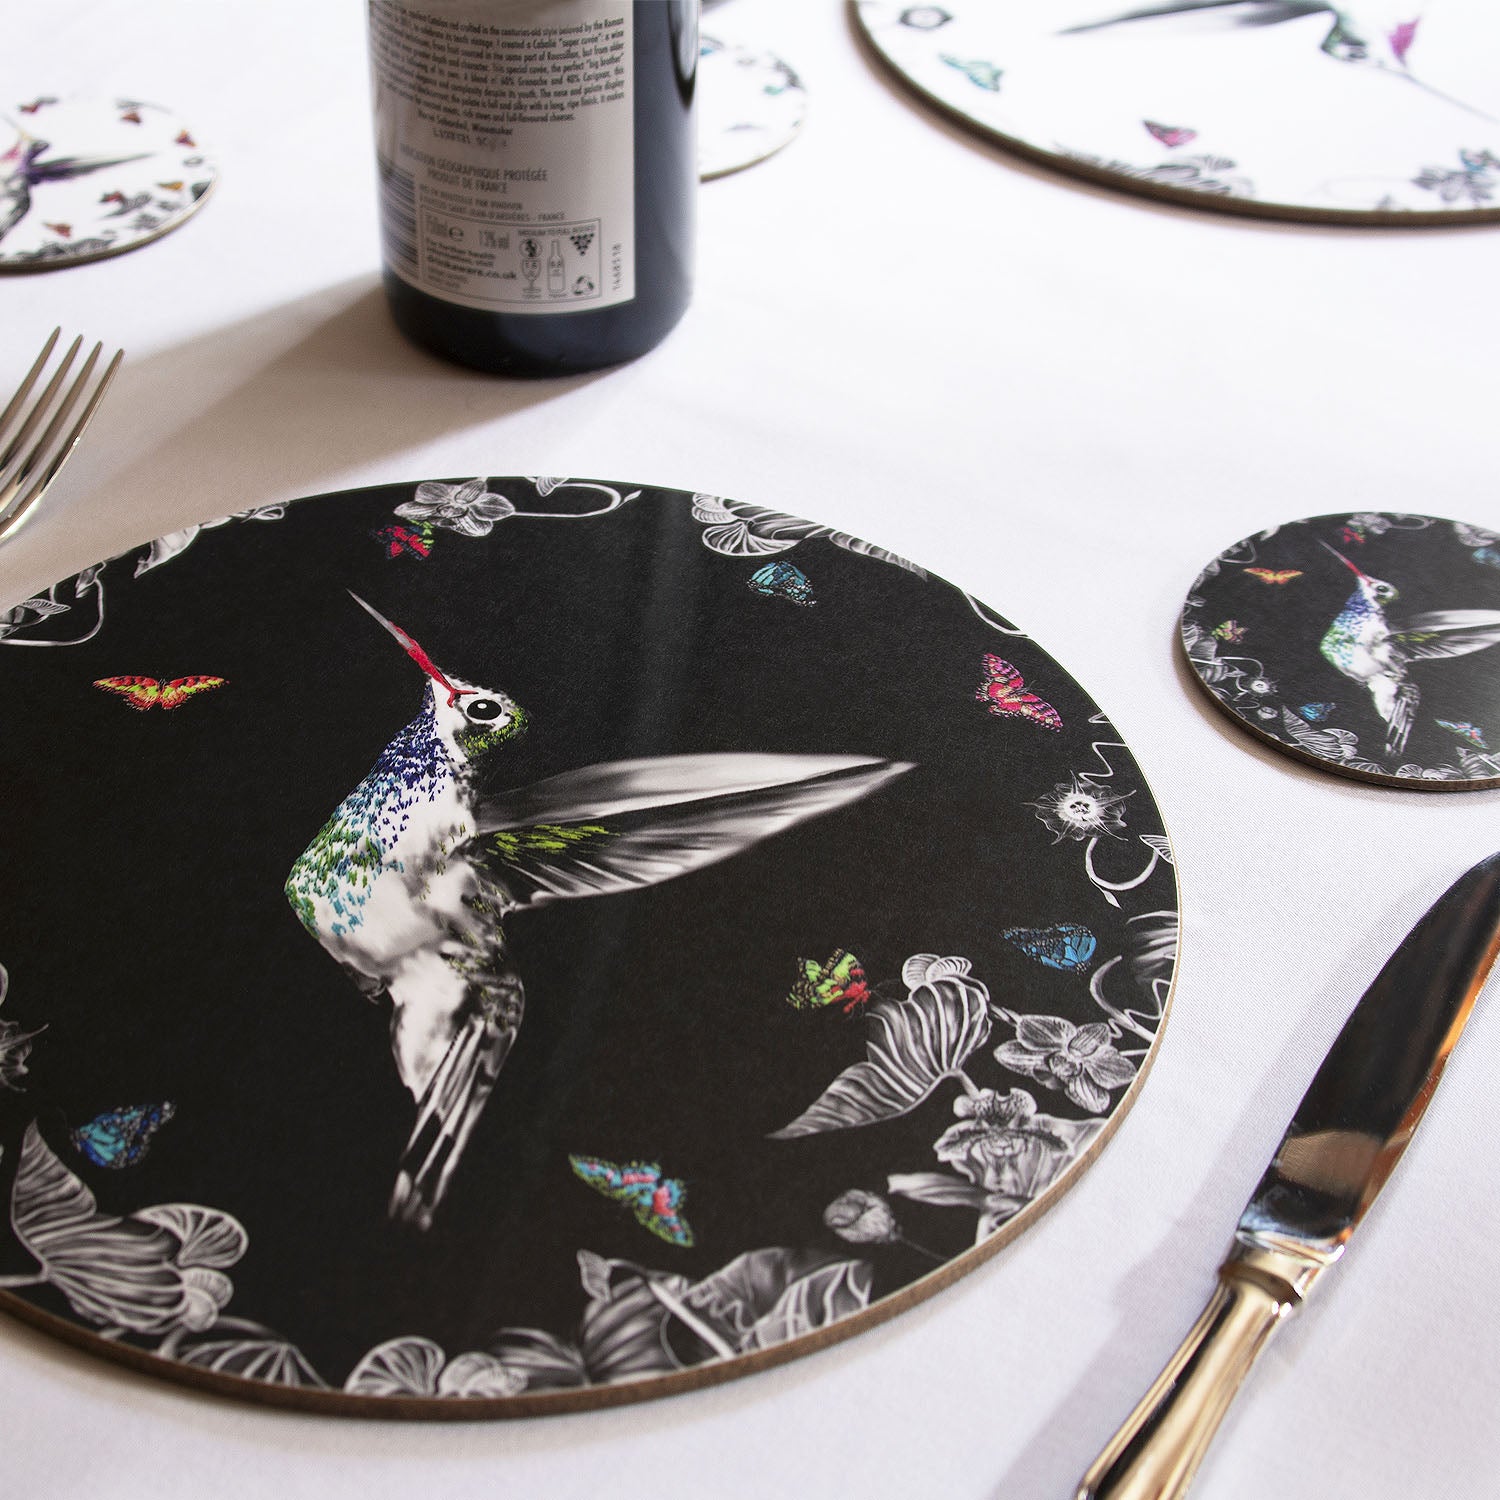 Black hummingbird placemat on the table